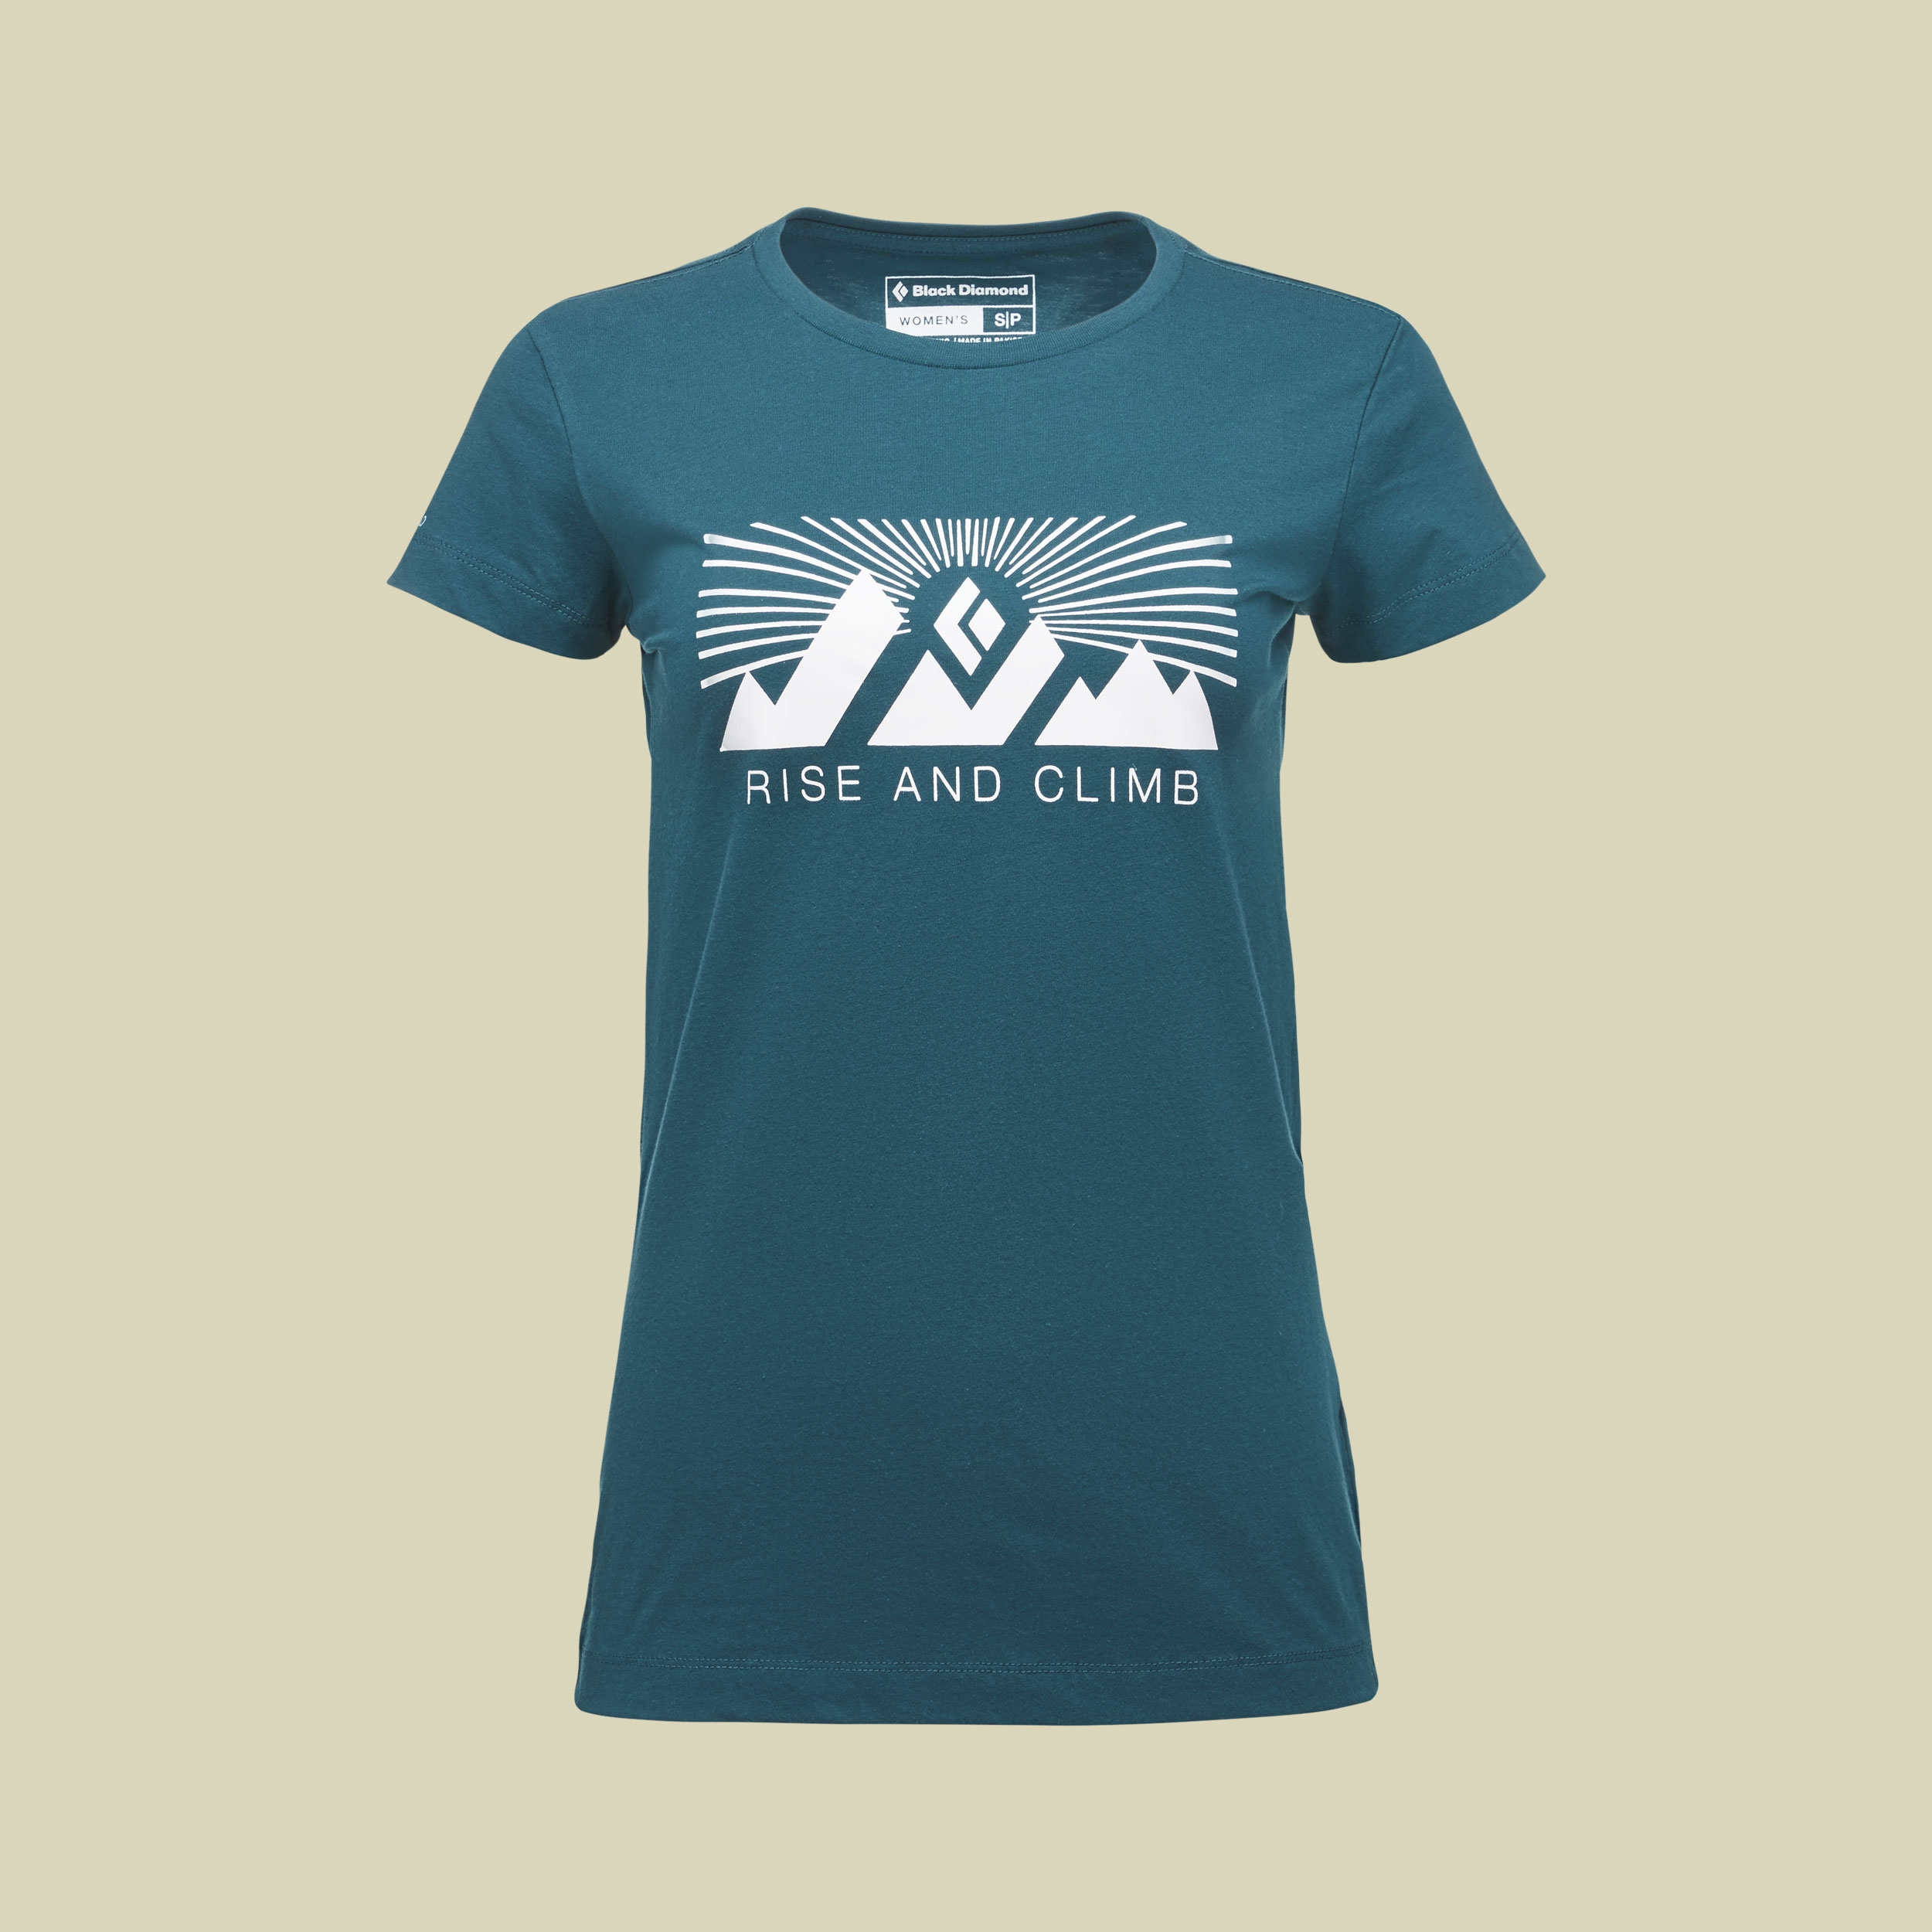 SS Rise And Climb Tee Women Größe S Farbe spruce